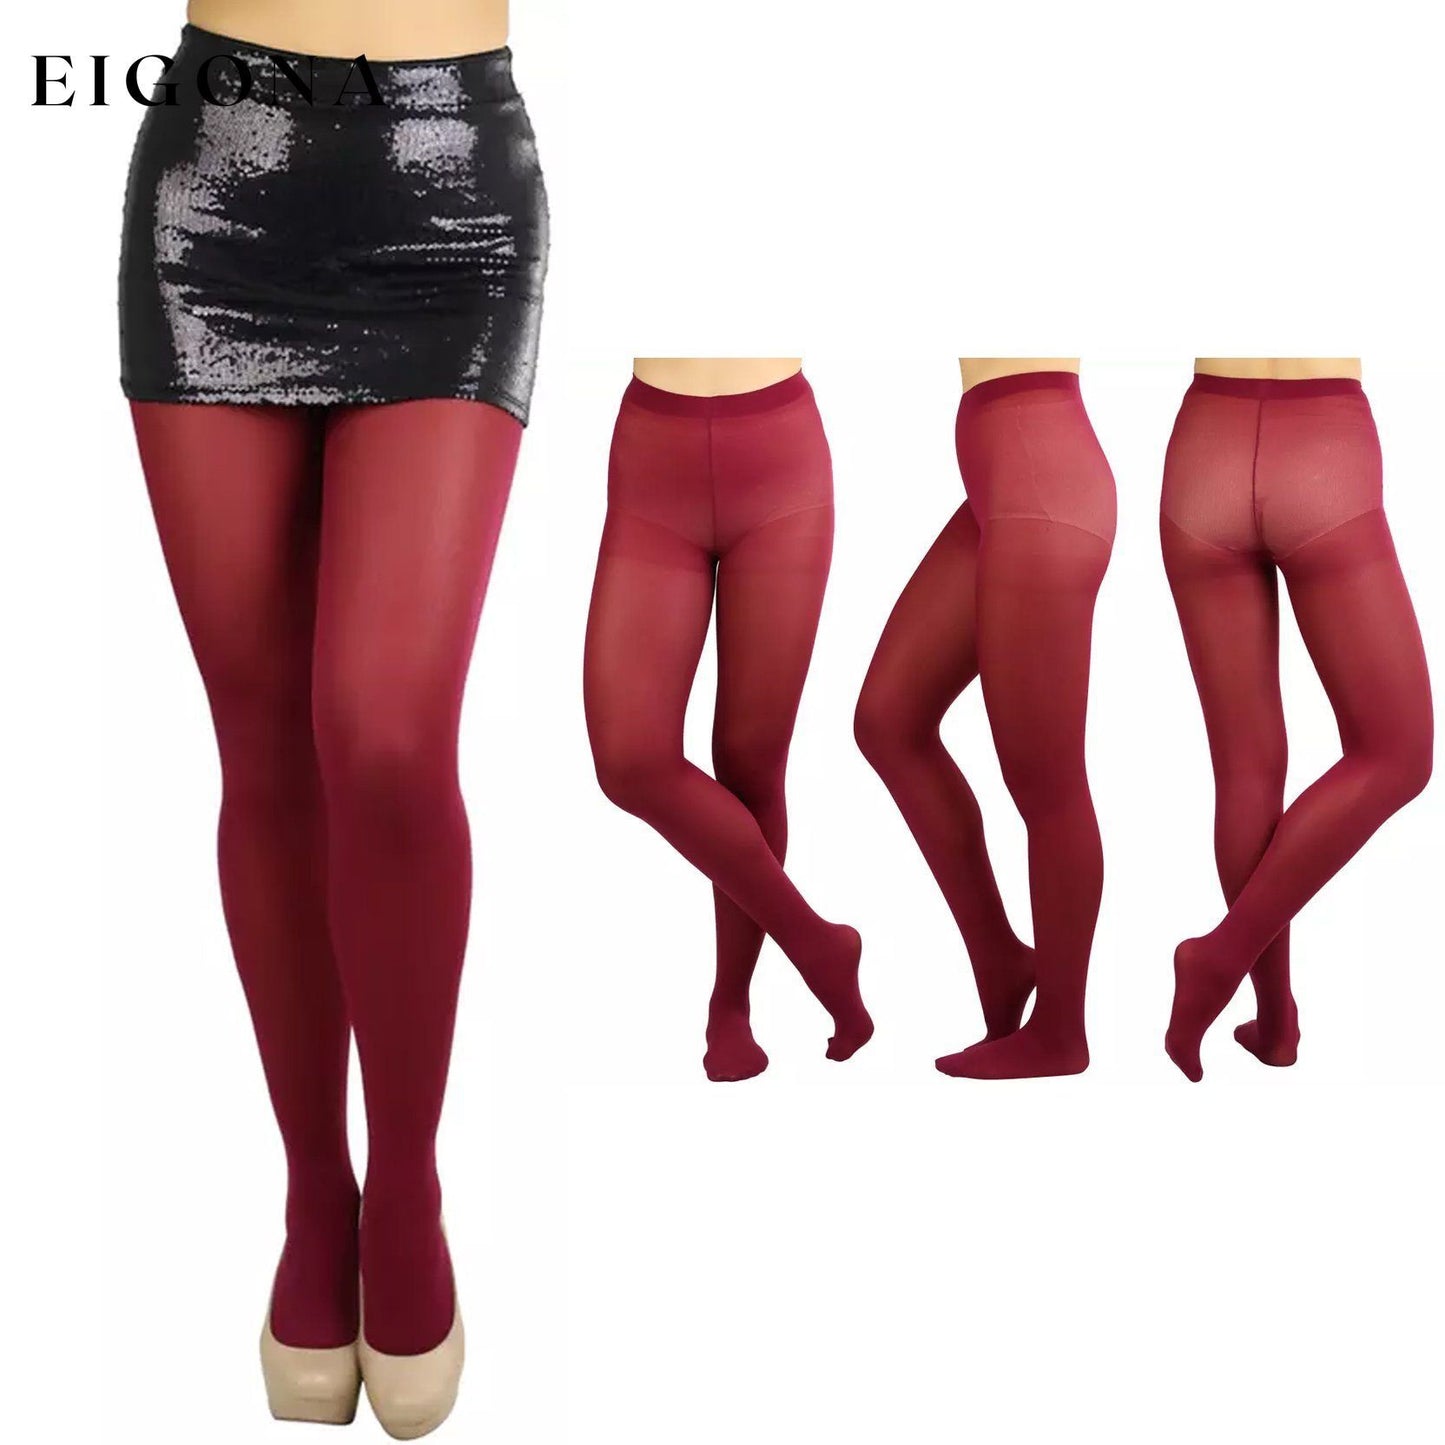 6-Pack: Women's Basic or Vibrant Semi Opaque Pantyhose Burgundy __stock:550 lingerie refund_fee:1200